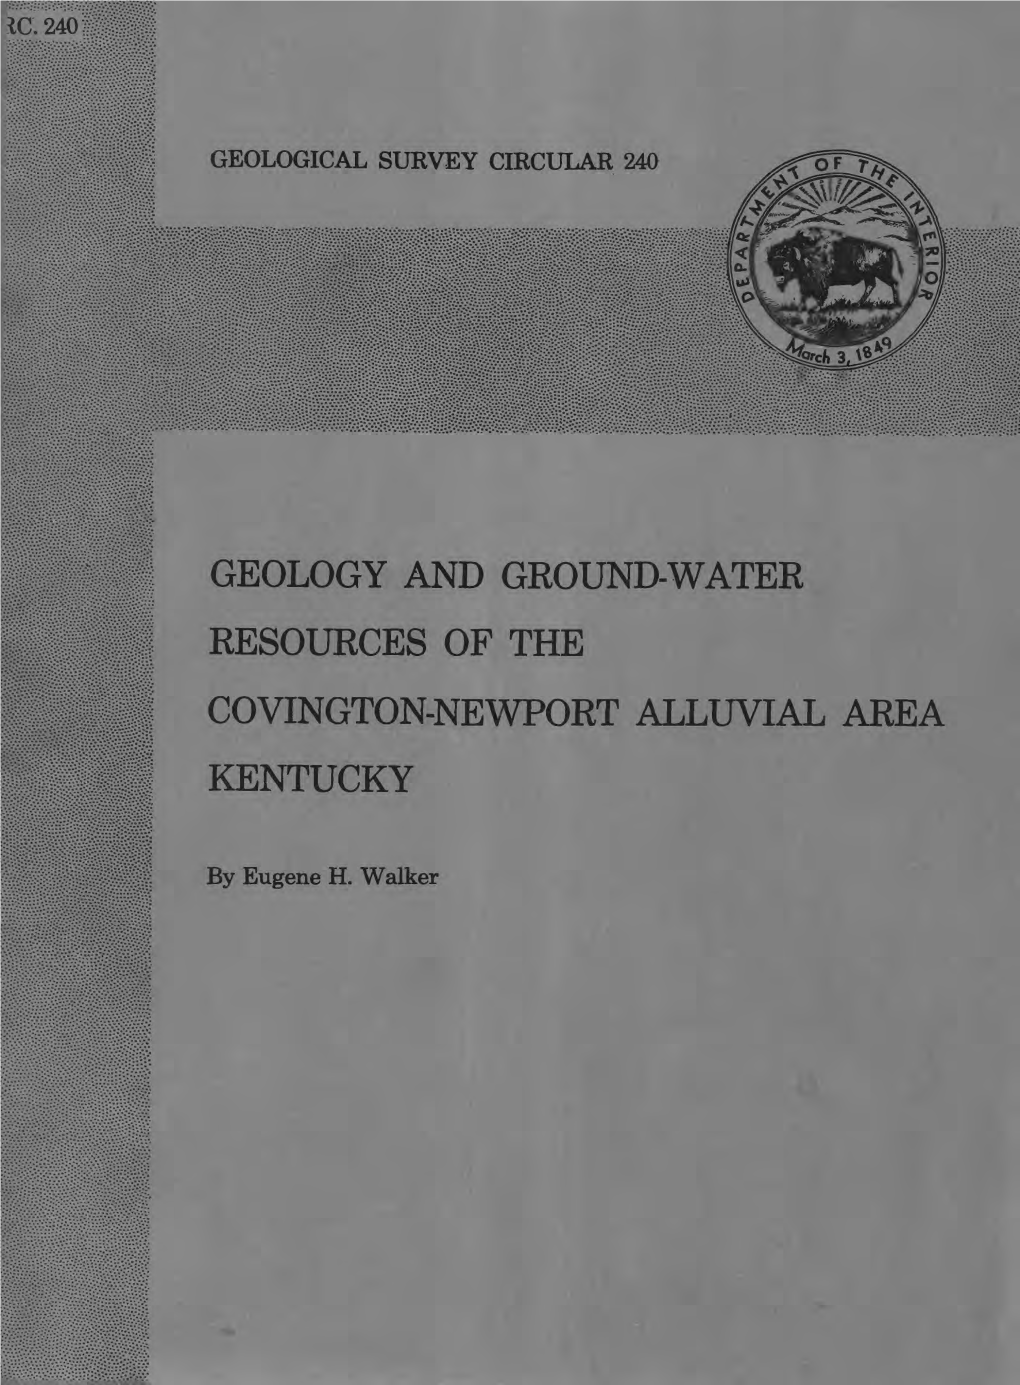 Geology and Ground-Water Resources of the Covington-Newport Alluvial Area Kentucky